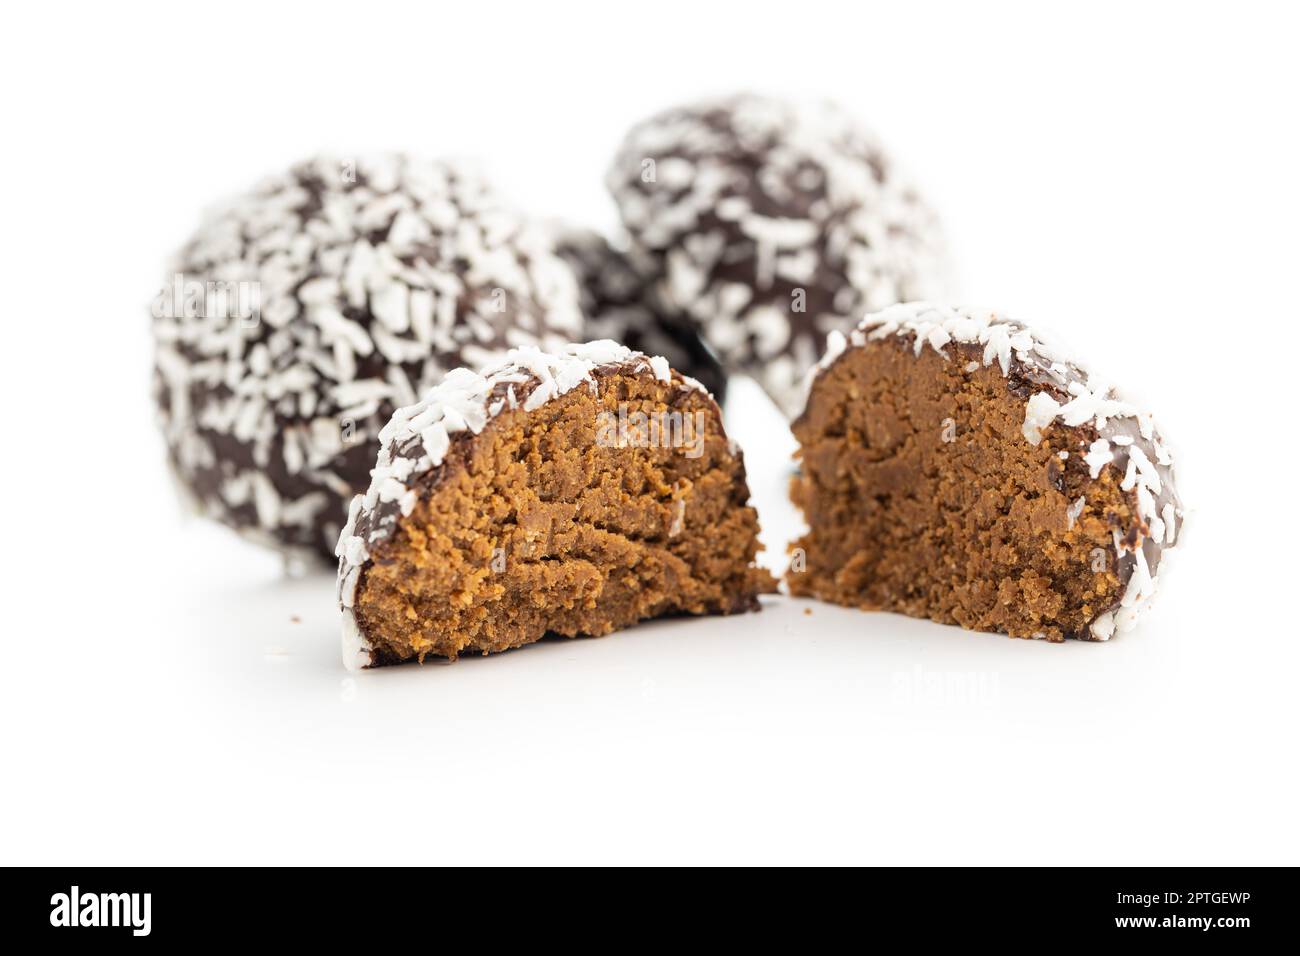 Coconut chocolate balls isolated on the white background. Stock Photo